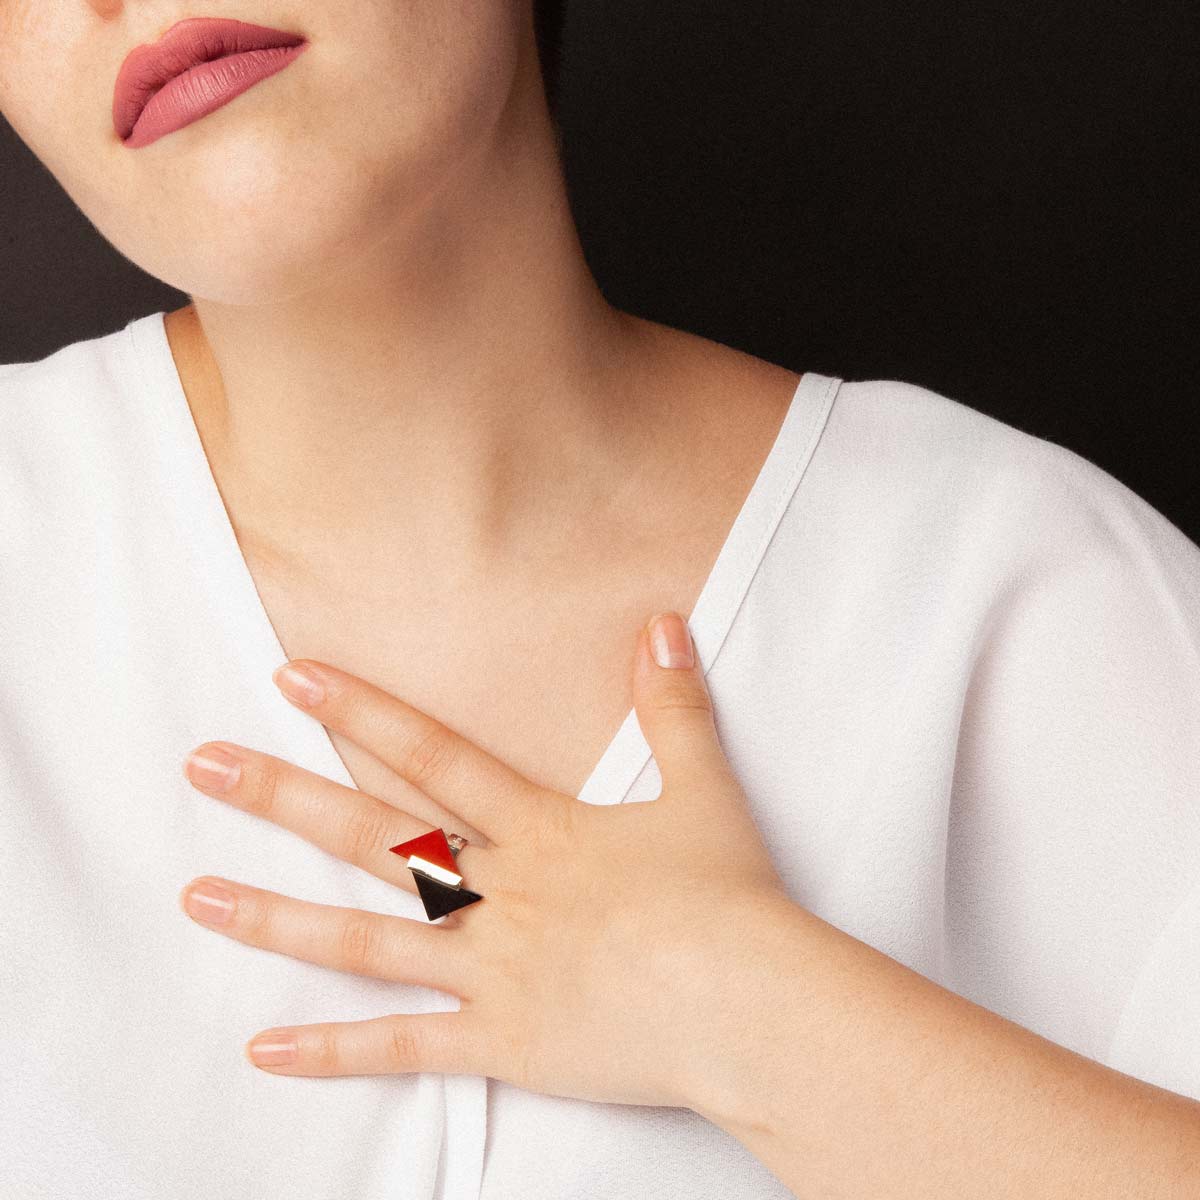 Alu handcrafted ring in 9k or 18k gold, sterling silver, onyx and red jasper designed by Belen Bajo m1